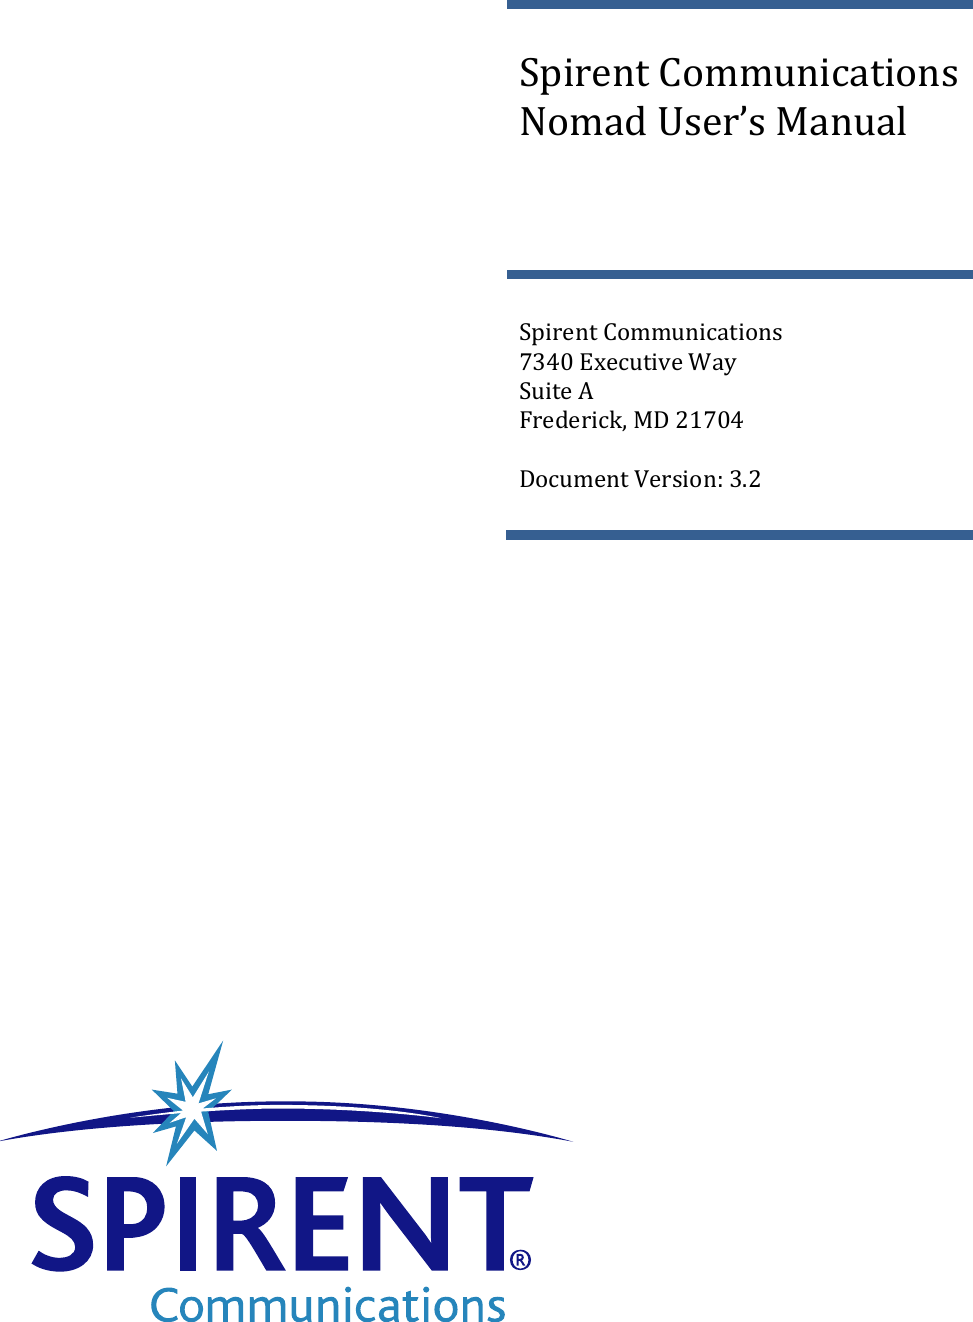                                            Spirent Communications Nomad User’s Manual  Spirent Communications 7340 Executive Way Suite A Frederick, MD 21704  Document Version: 3.2 